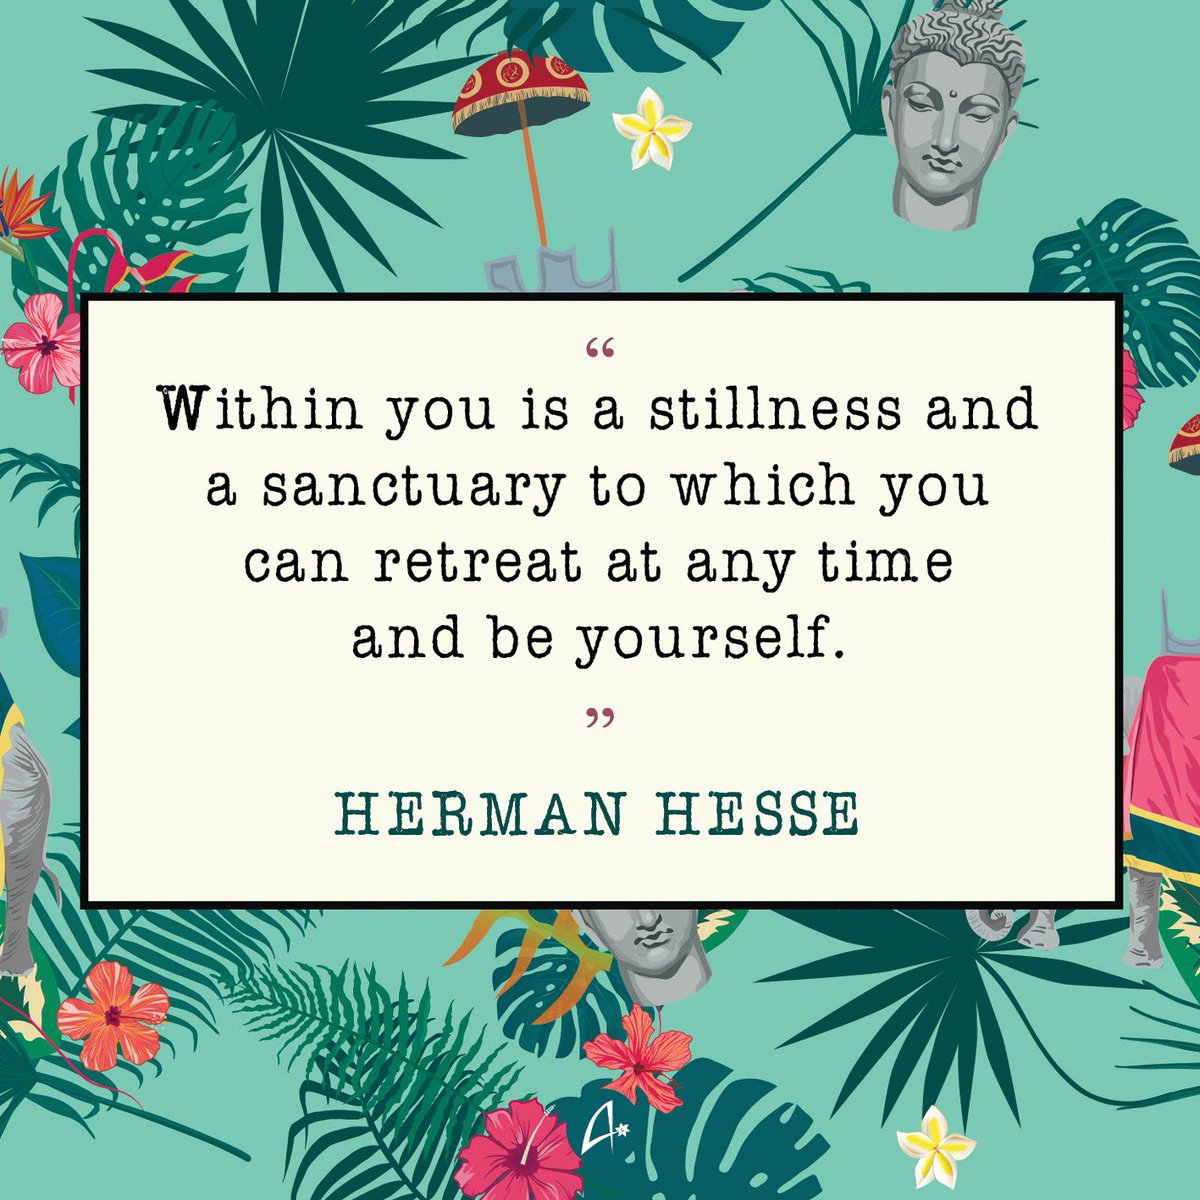 Quote of the day!✨ ✨ 

.
.
#amaryllispublishing #quotes #hermannhesse #hermannhessequote #quoteoftheday #quotestagram #quotestoliveby #quotesdaily #quotelife #quotestags #lifequote #quotestoinspire